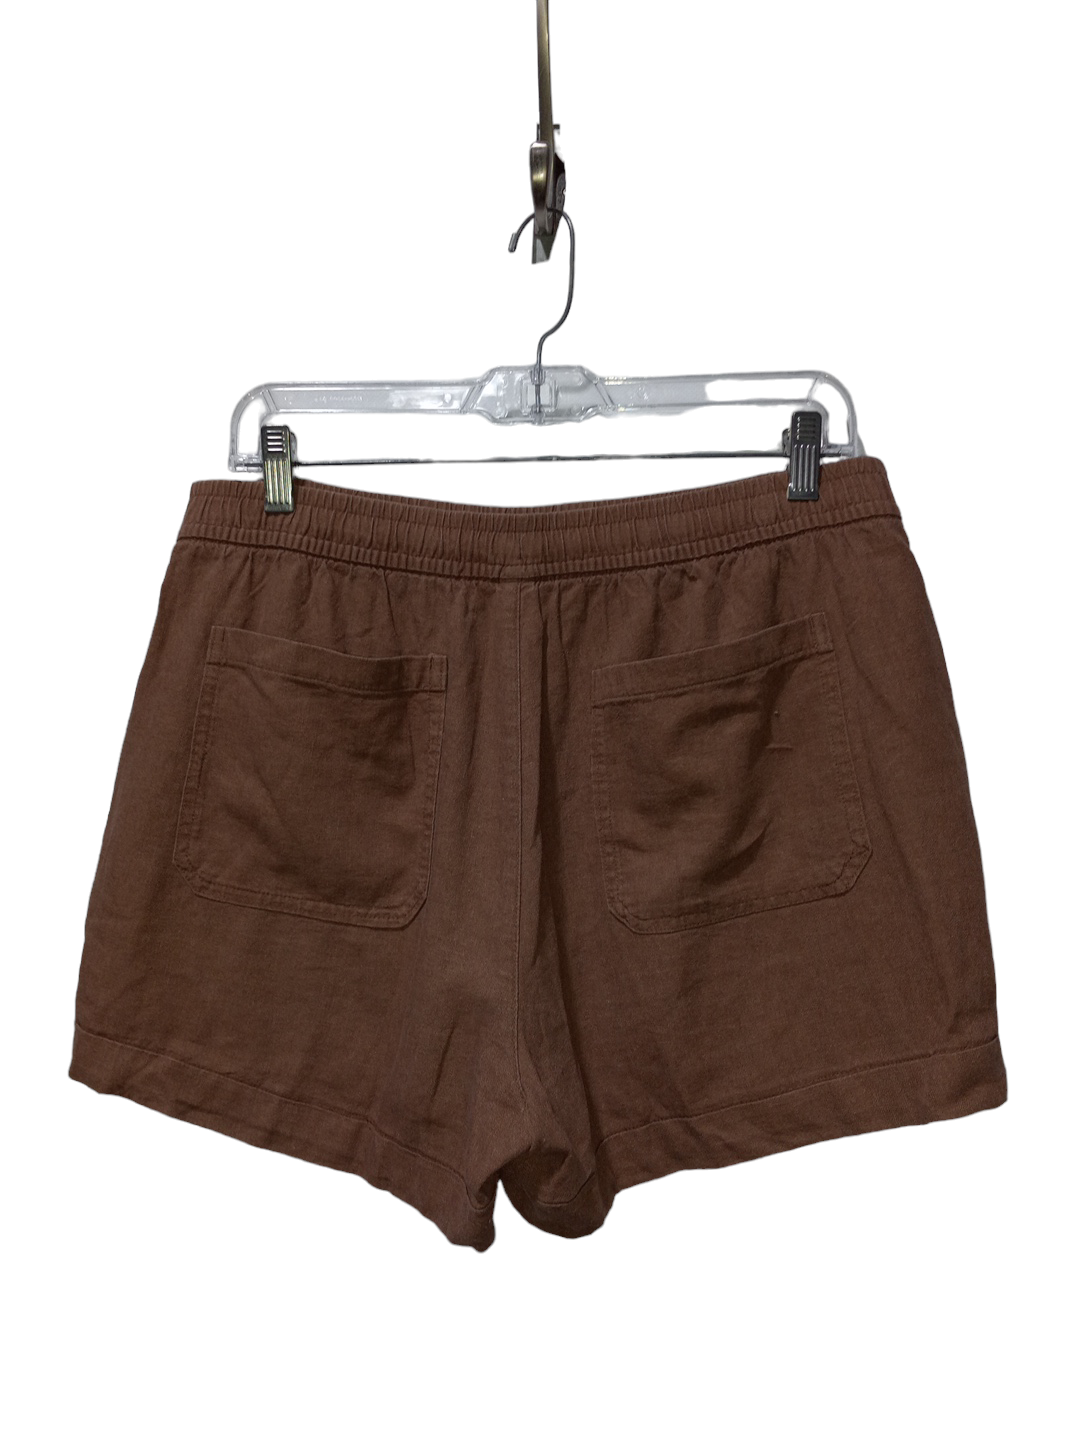 Brown Shorts Old Navy, Size M